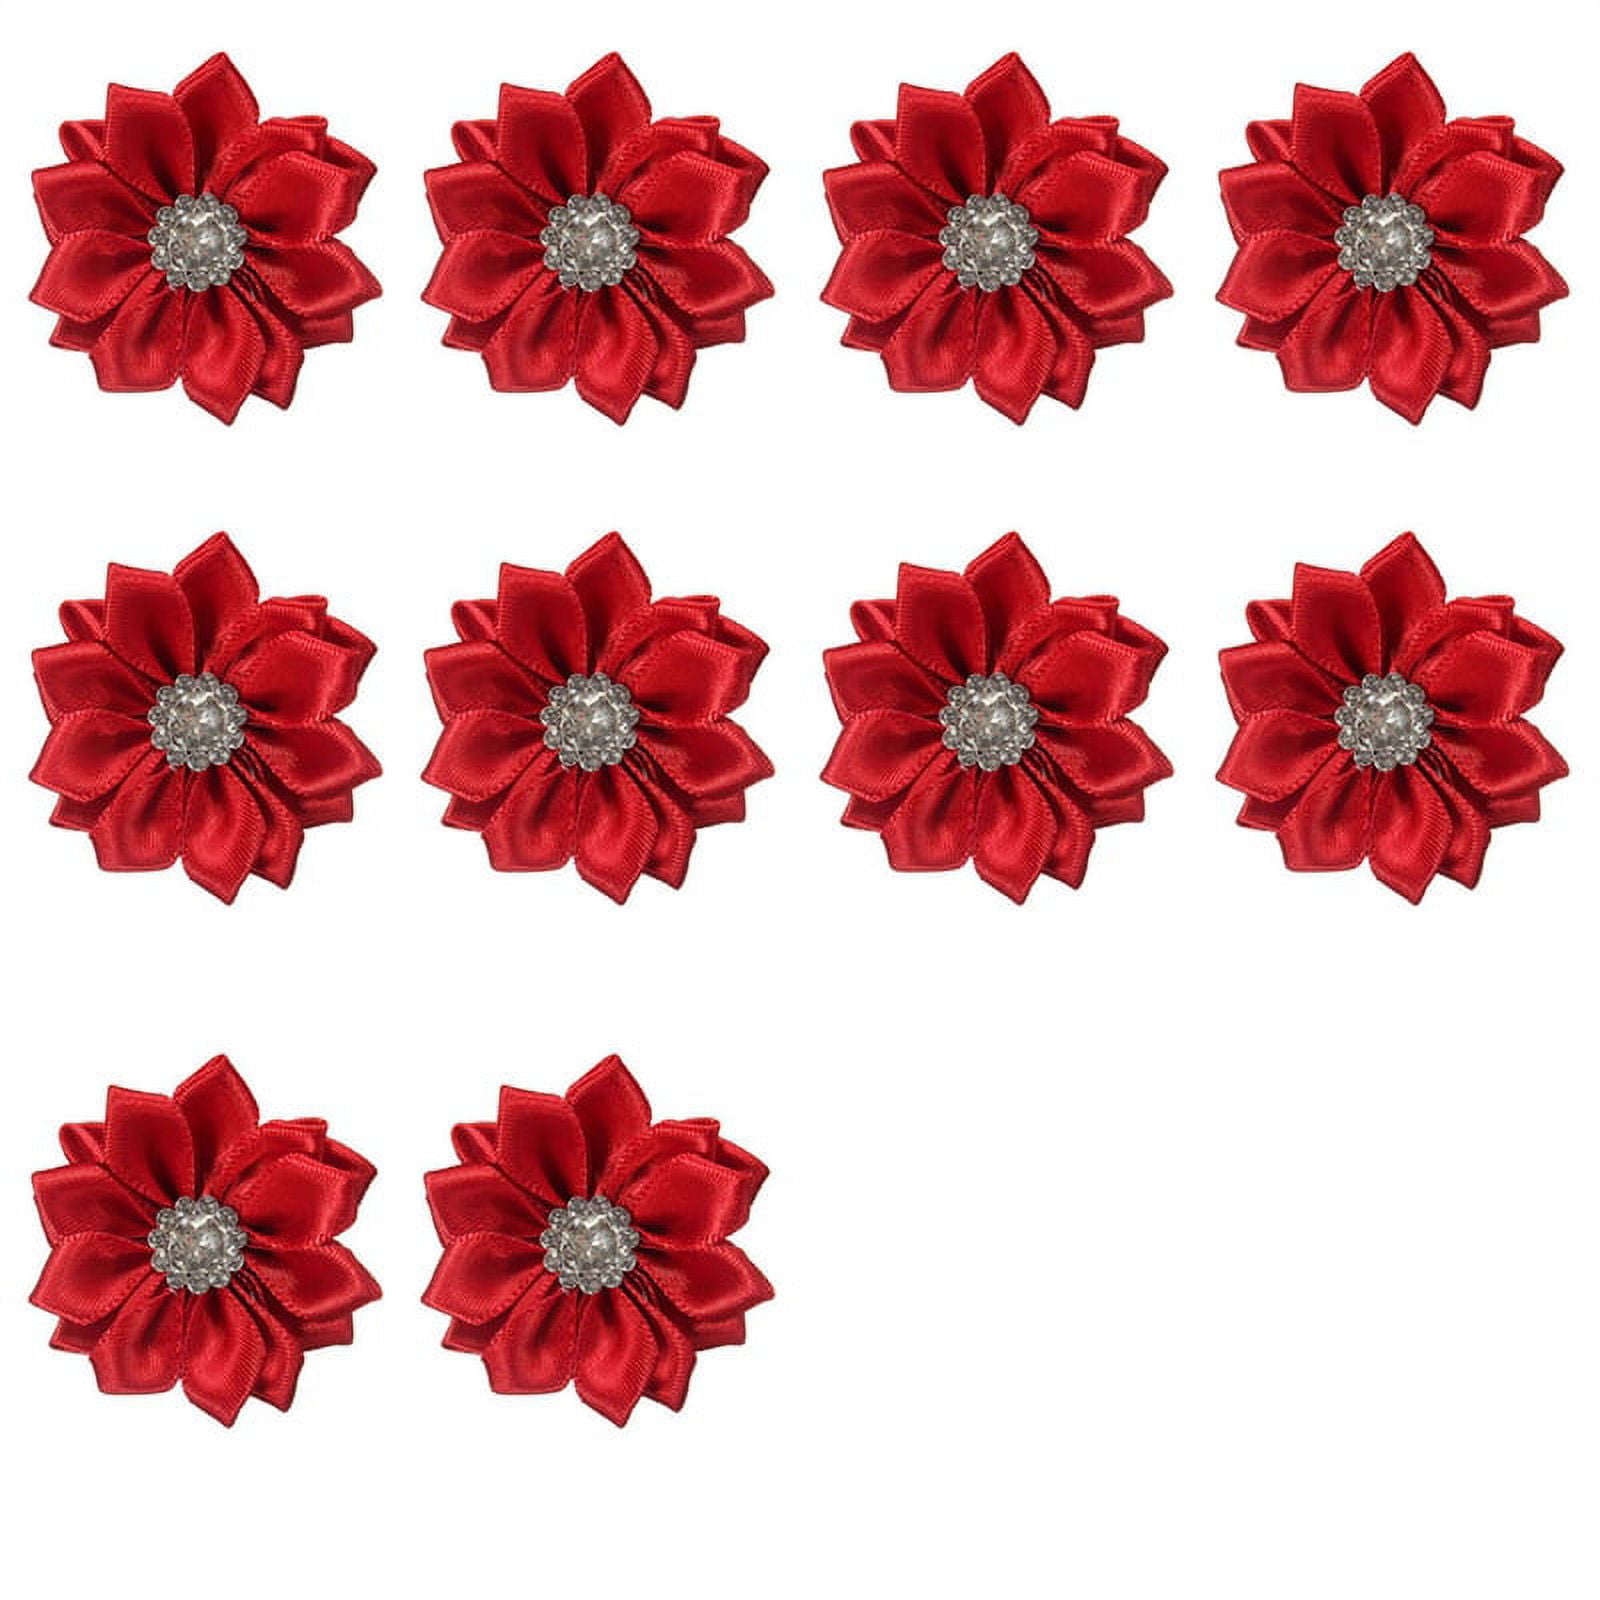  50 Pieces Satin Ribbon Flowers Bows 1.18 Inch Rhinestones  Flower Sewing Appliques Daisy Flower Heads Wedding Ornament Decor DIY Craft  Wreath Present Wrapping (Multi-Color) : Arts, Crafts & Sewing